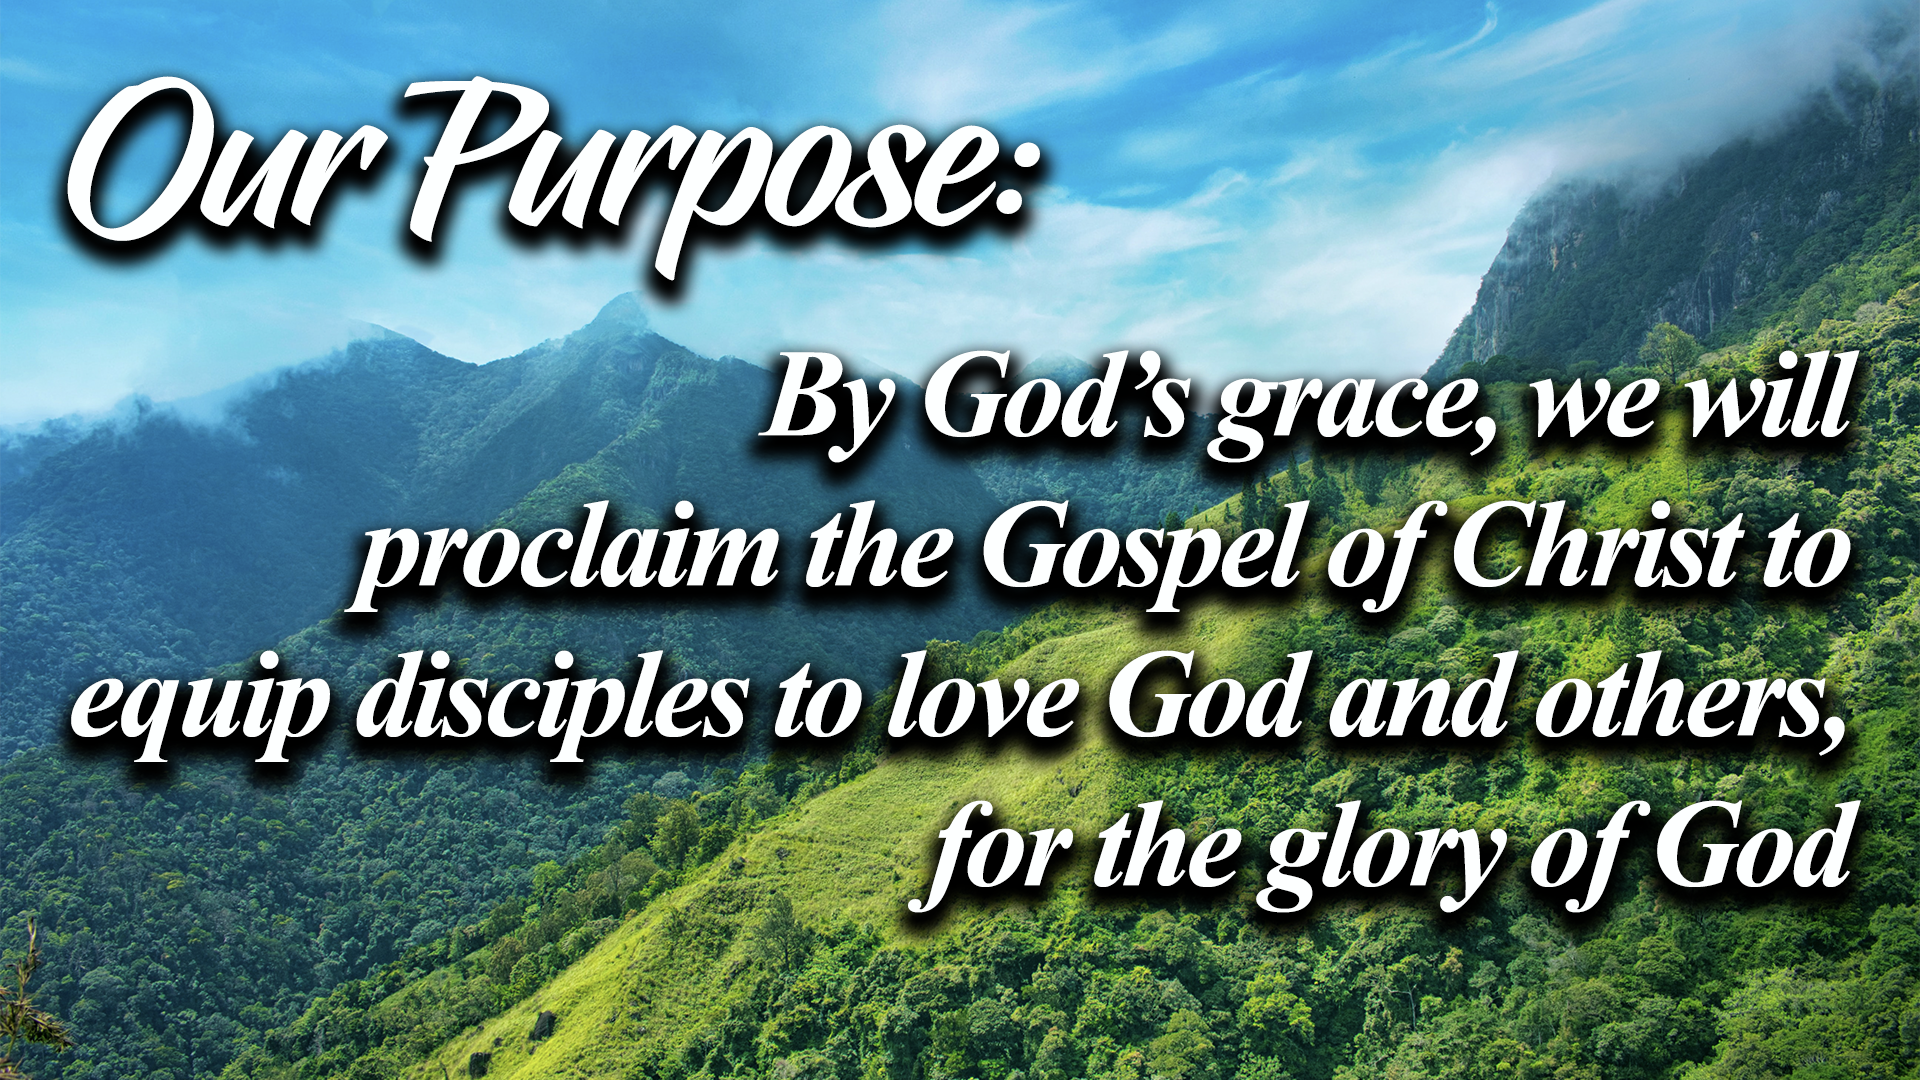 By God's grace, we will proclaim the Gospel of Christ to equip disciples to love God and others, for the glory of God.